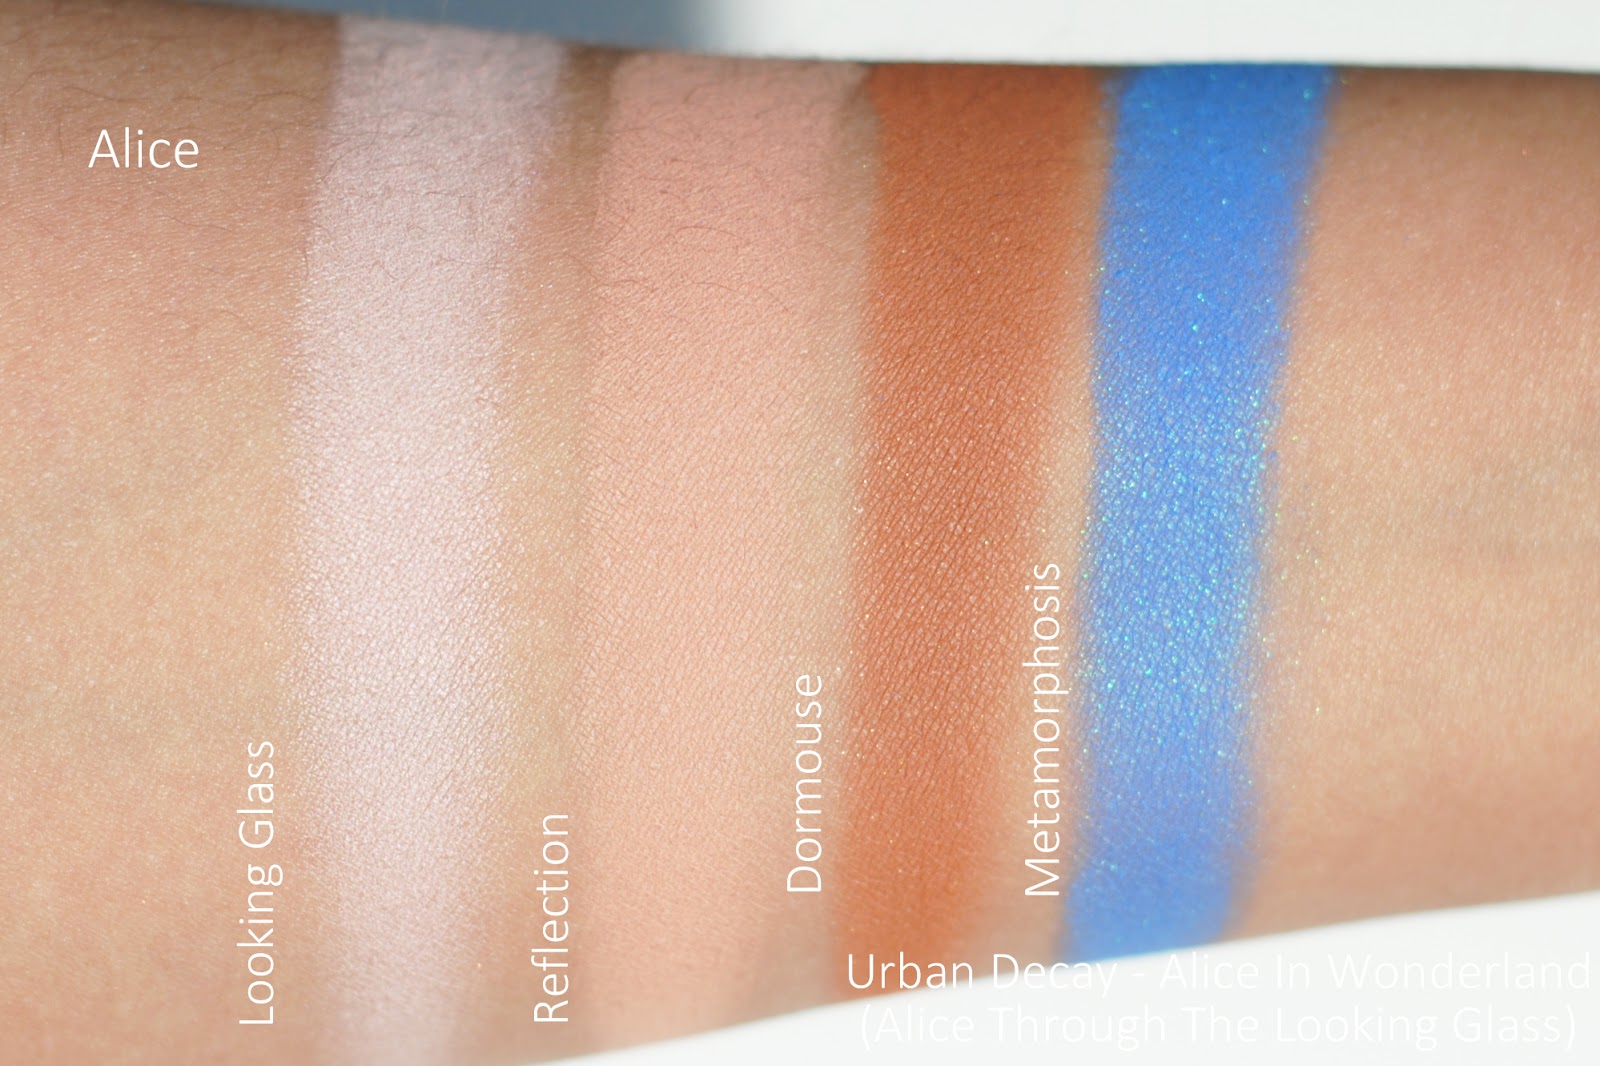 urban decay alice in wonderland alice through the looking glass swatches